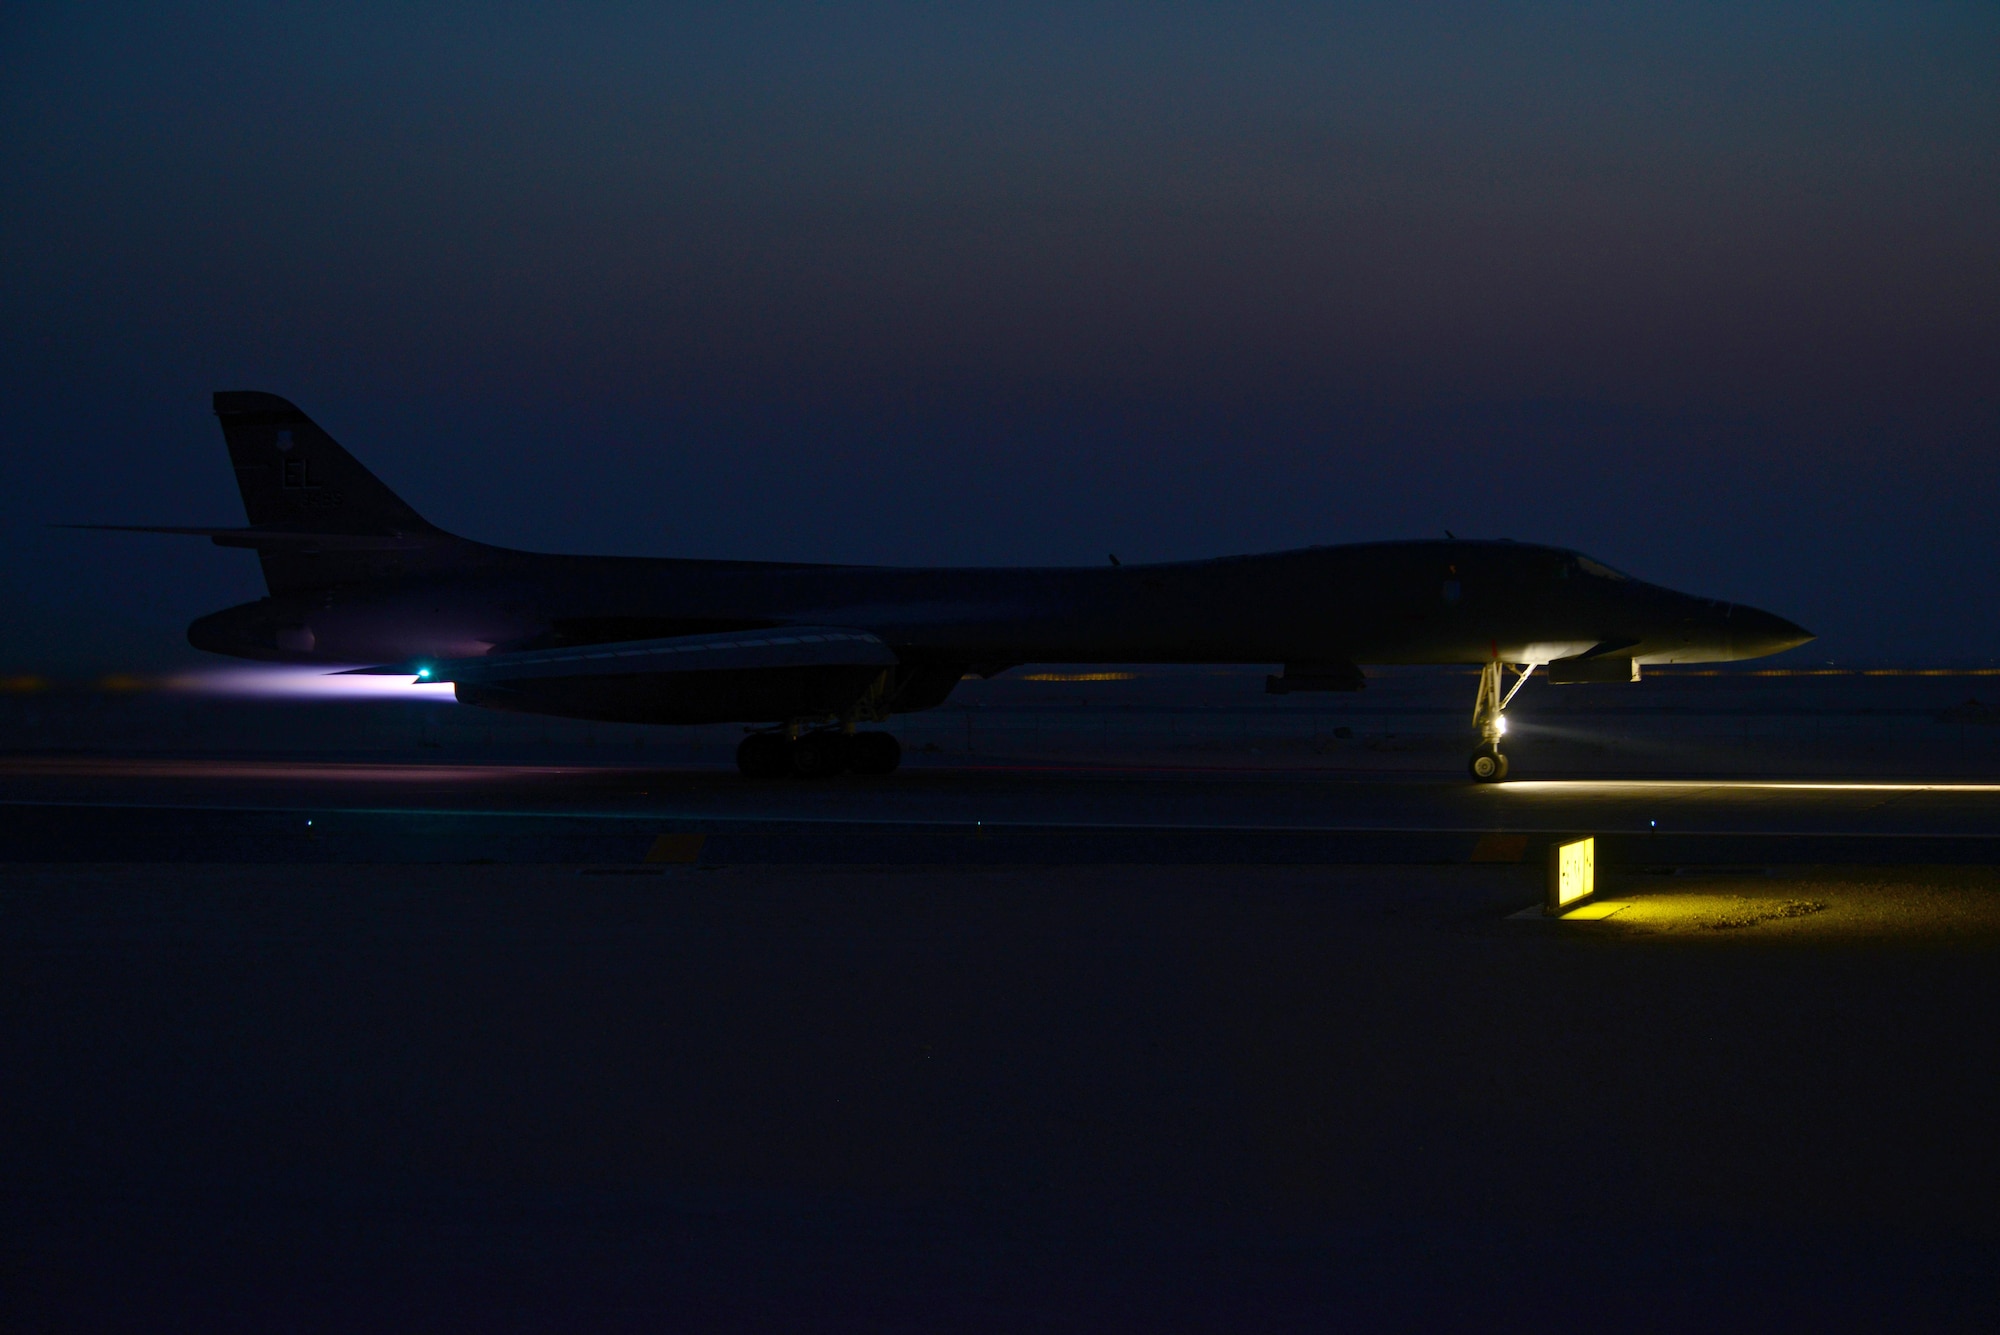 A B-1B Lancer assigned to the 34th Expeditionary Bomb Squadron, deployed from Ellsworth Air Force Base, S.D., takes off, Feb. 25, 2015, at Al Udeid Air Base, Qatar. B-1B Lancers can rapidly deliver massive quantities of precision and non-precision weapons against any adversary, anywhere in the world, at any time. Airstrikes provided by the B-1 have helped Iraqi and Kurdish forces to retake and hold key territory. (U.S. Air Force photo by Senior Airman Kia Atkins)